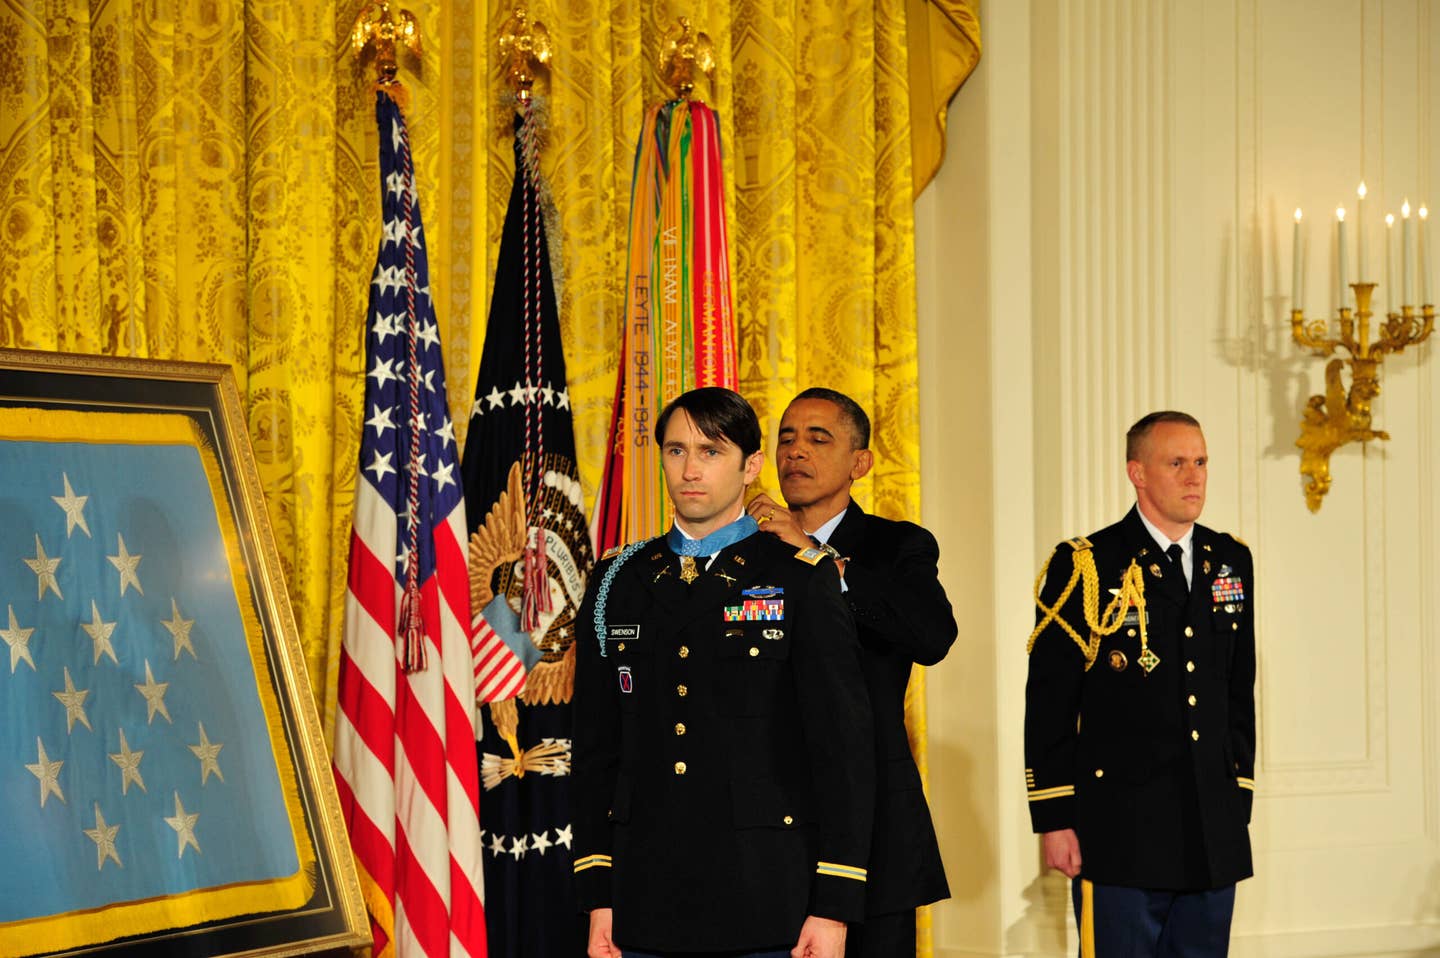 William Swenson medal of honor